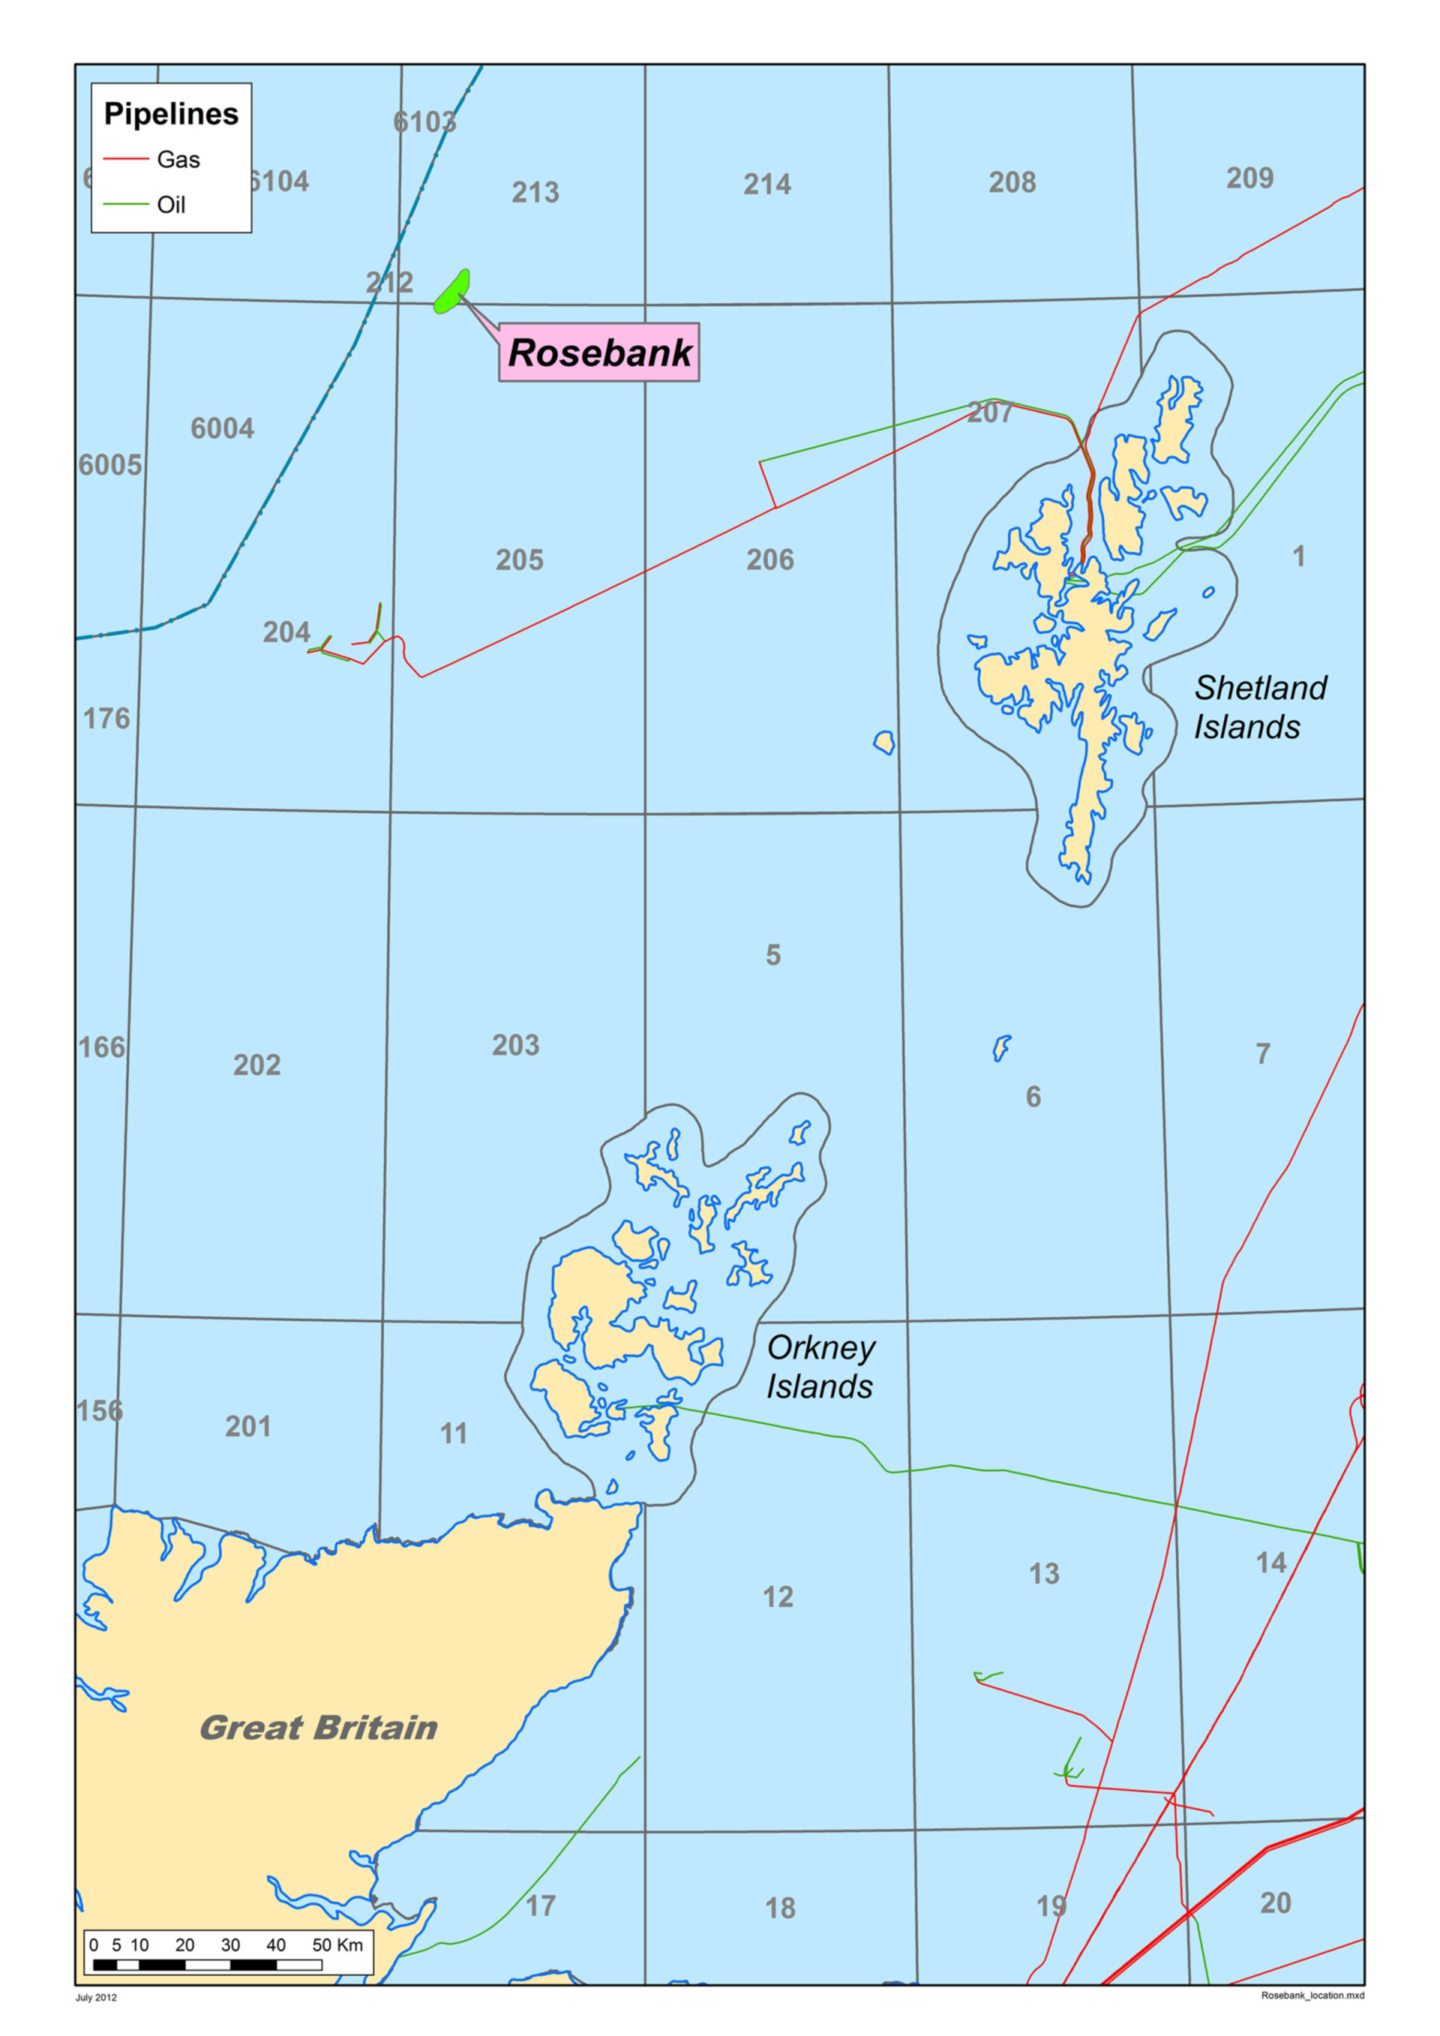 A map showing where the giant Rosebank oilfield is located, north-west of Shetland.